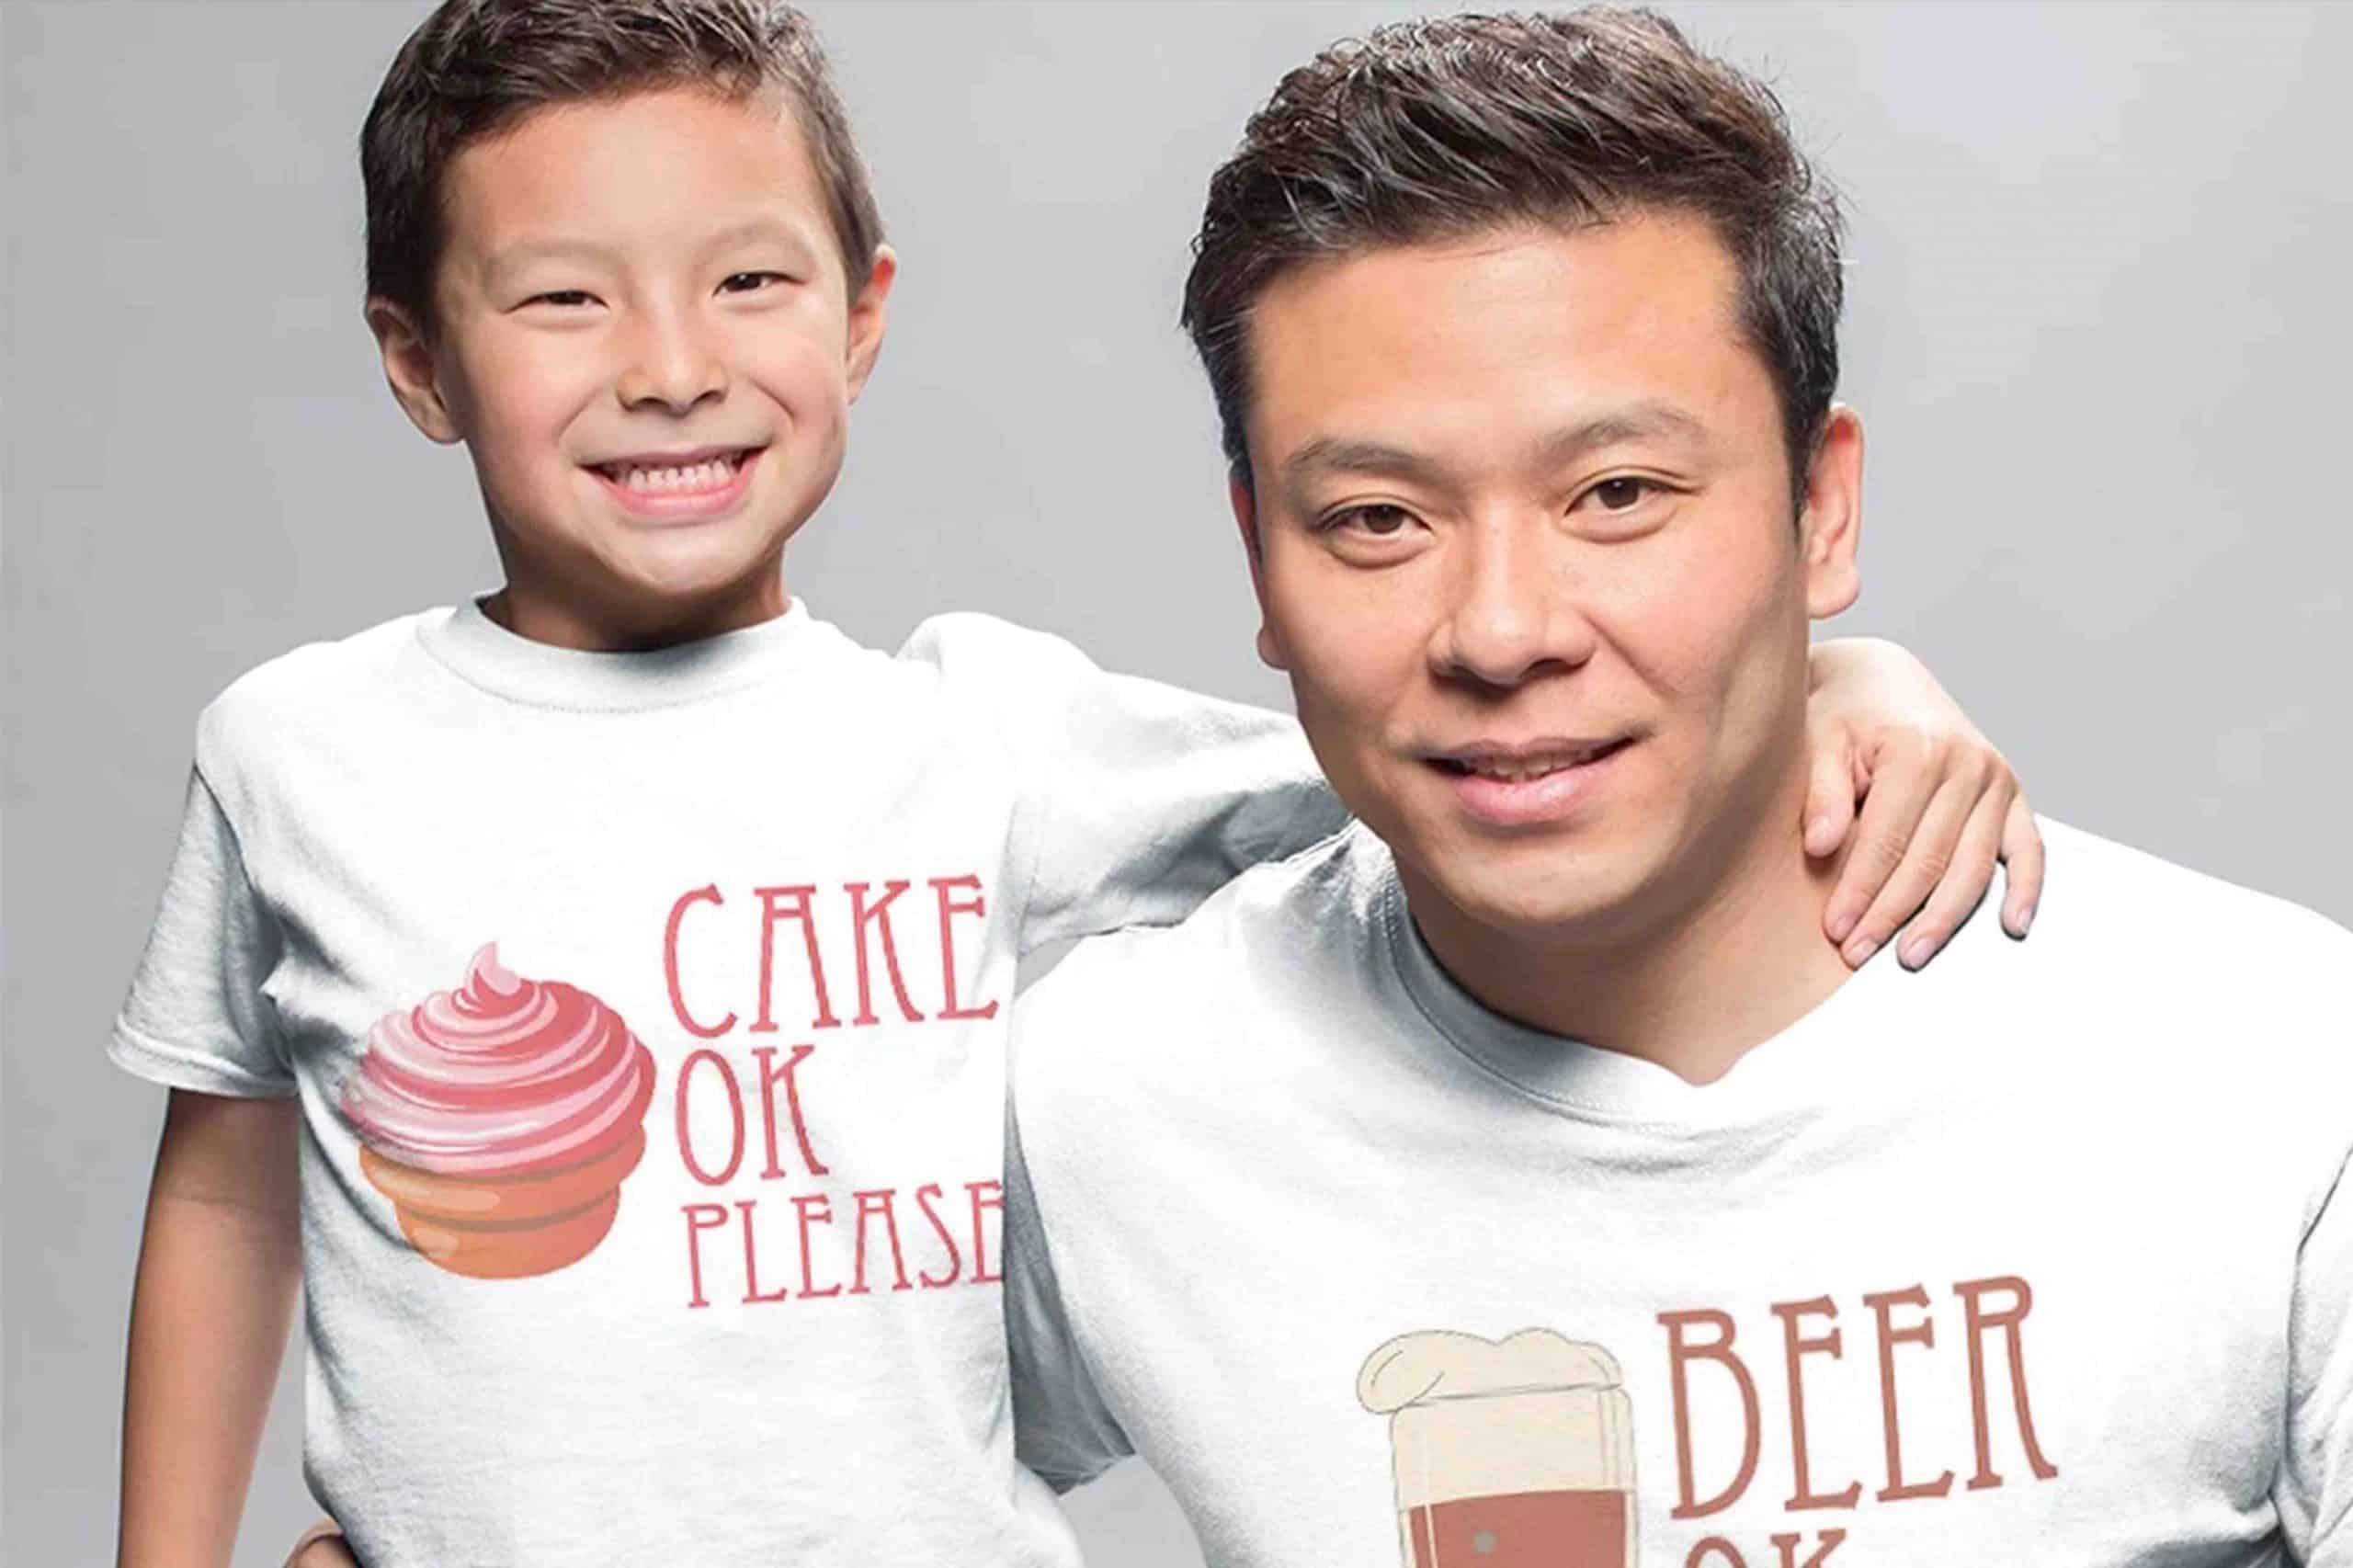 Adorable Matching Father & Son Outfits to Gift for Special Day